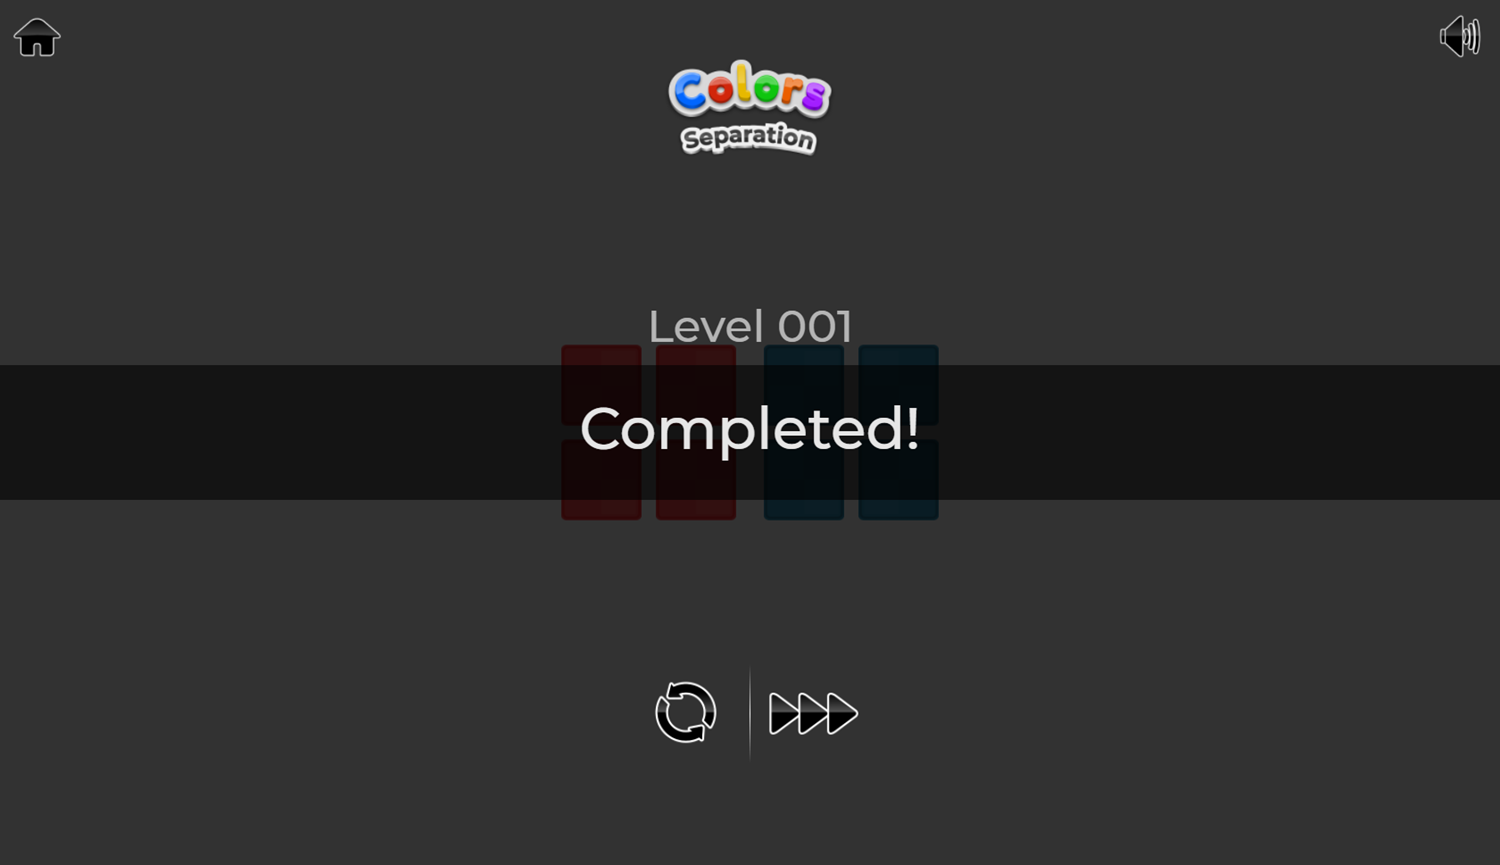 Colors Separation Game Level Completed Screenshot.